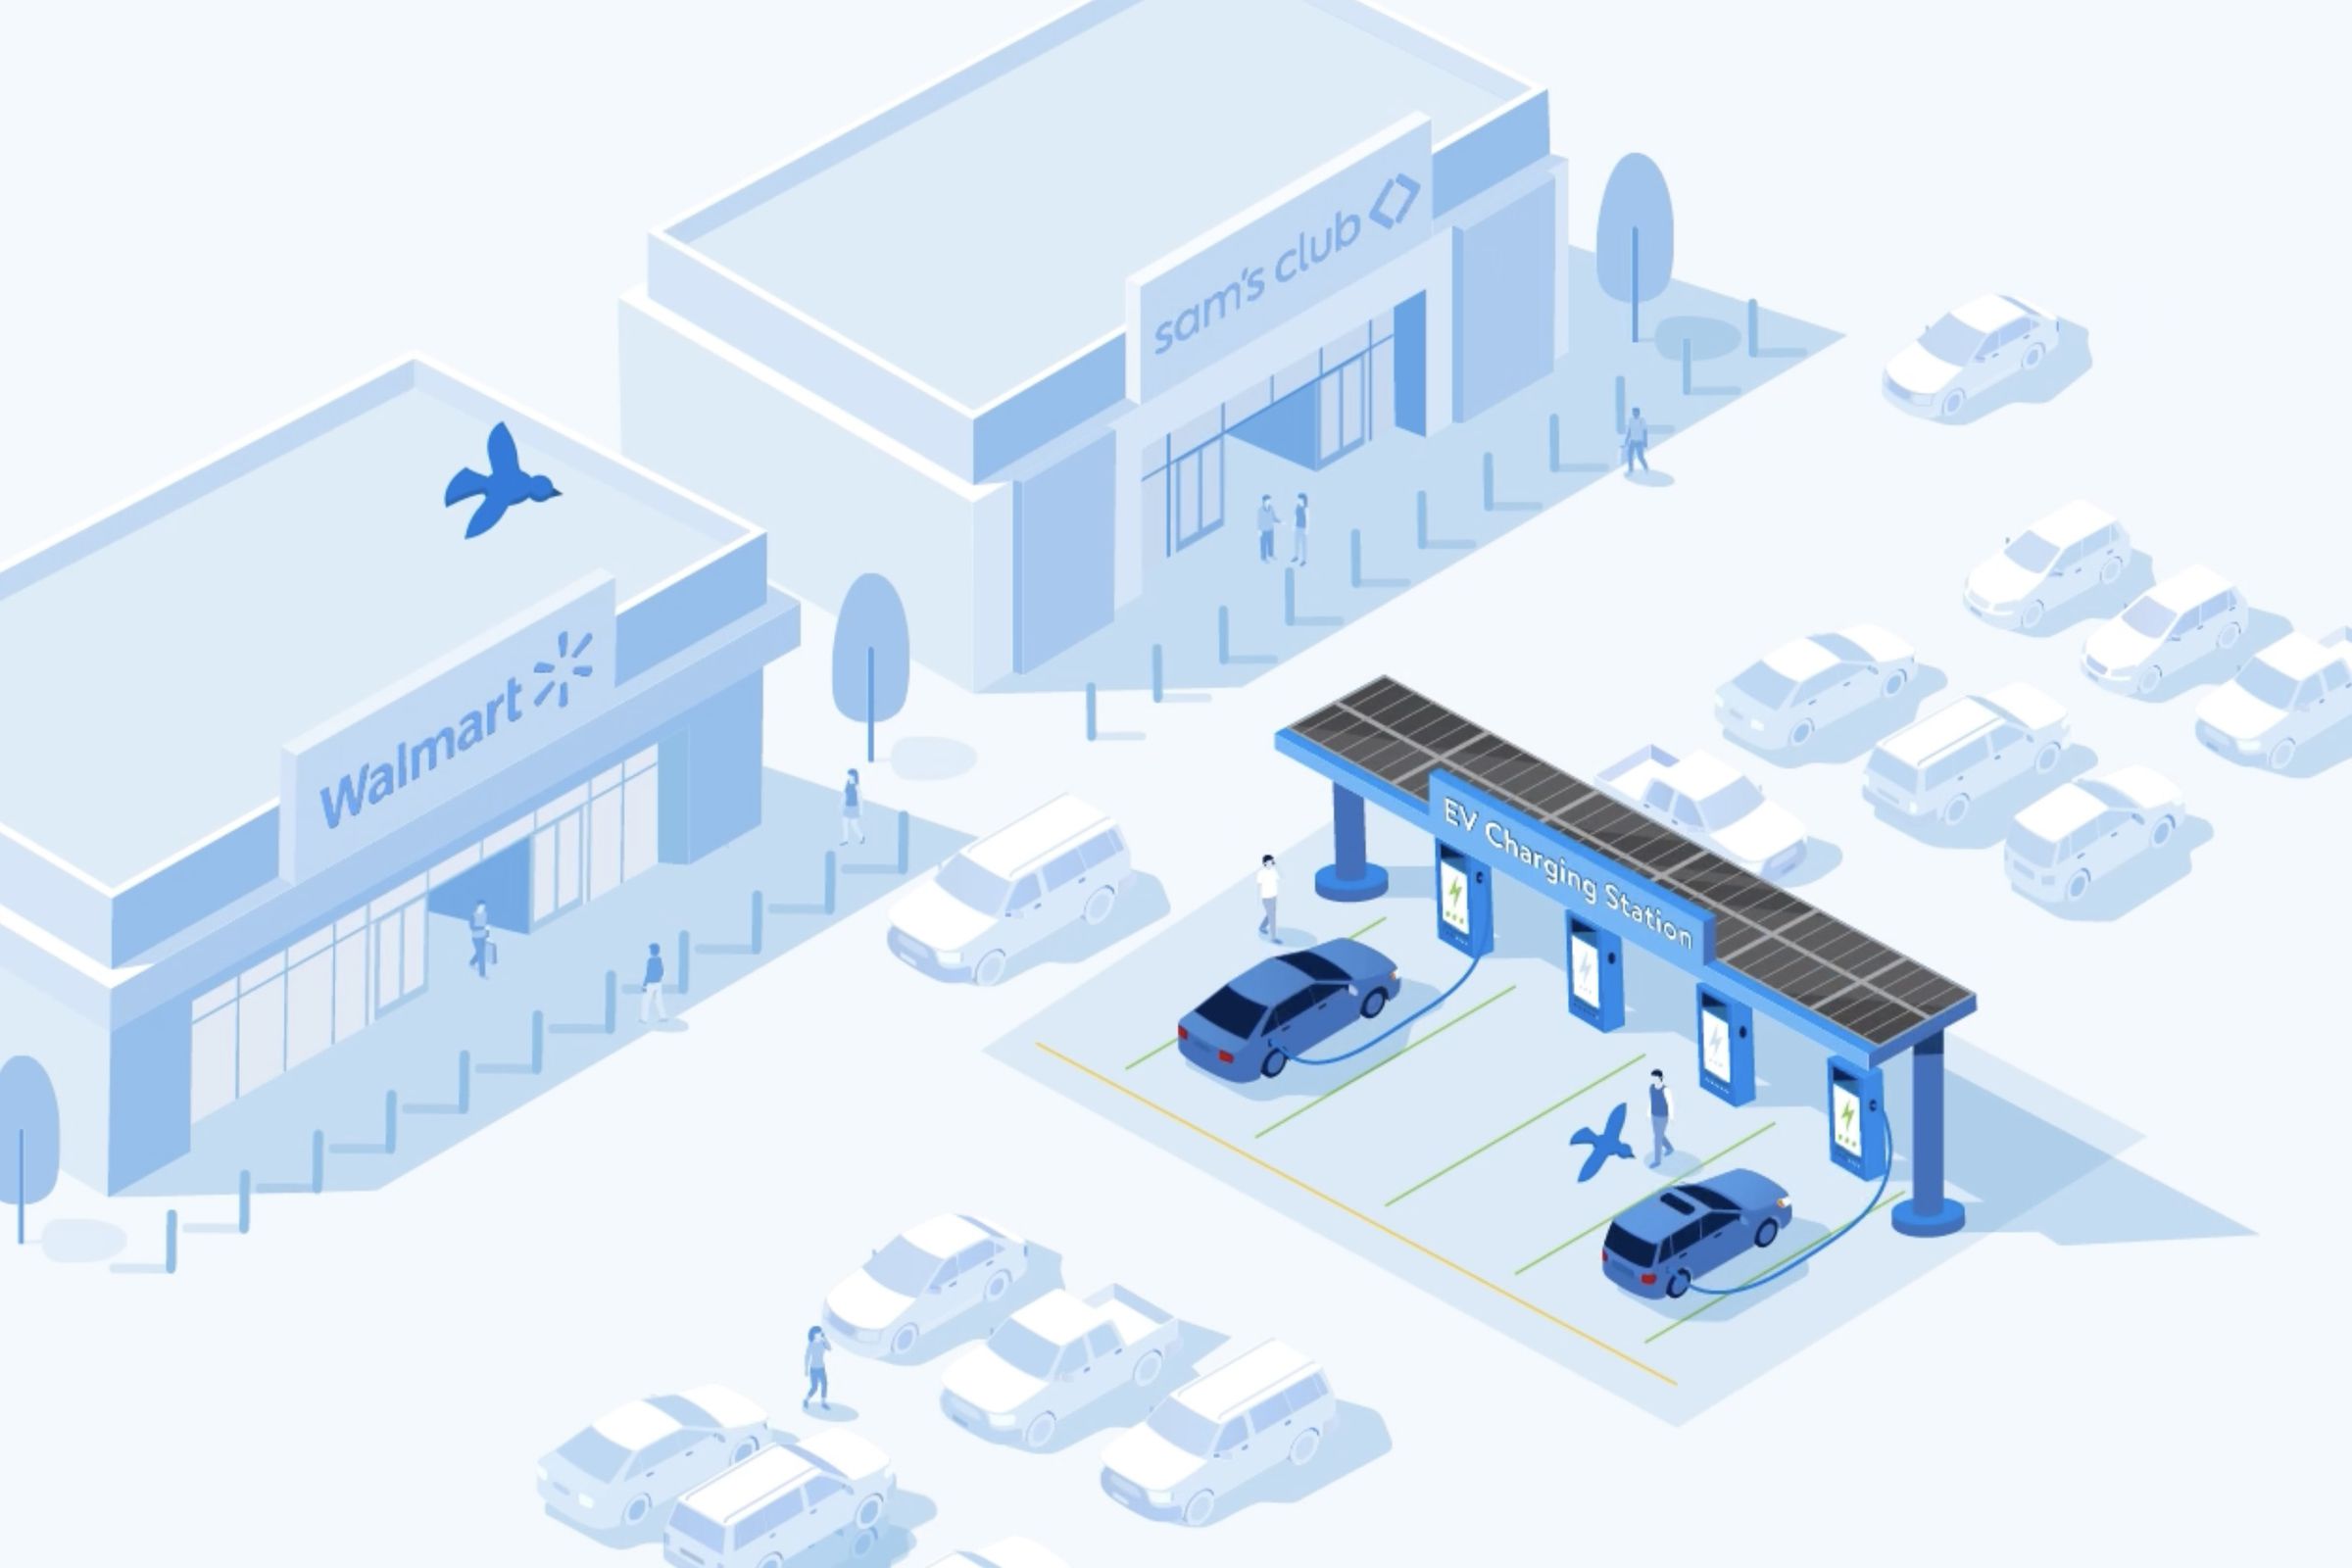 illustration of a parking lot with a Walmart and Sam's Club side-by-side and an electric vehicle station in the center with four units and two cars parked using them.